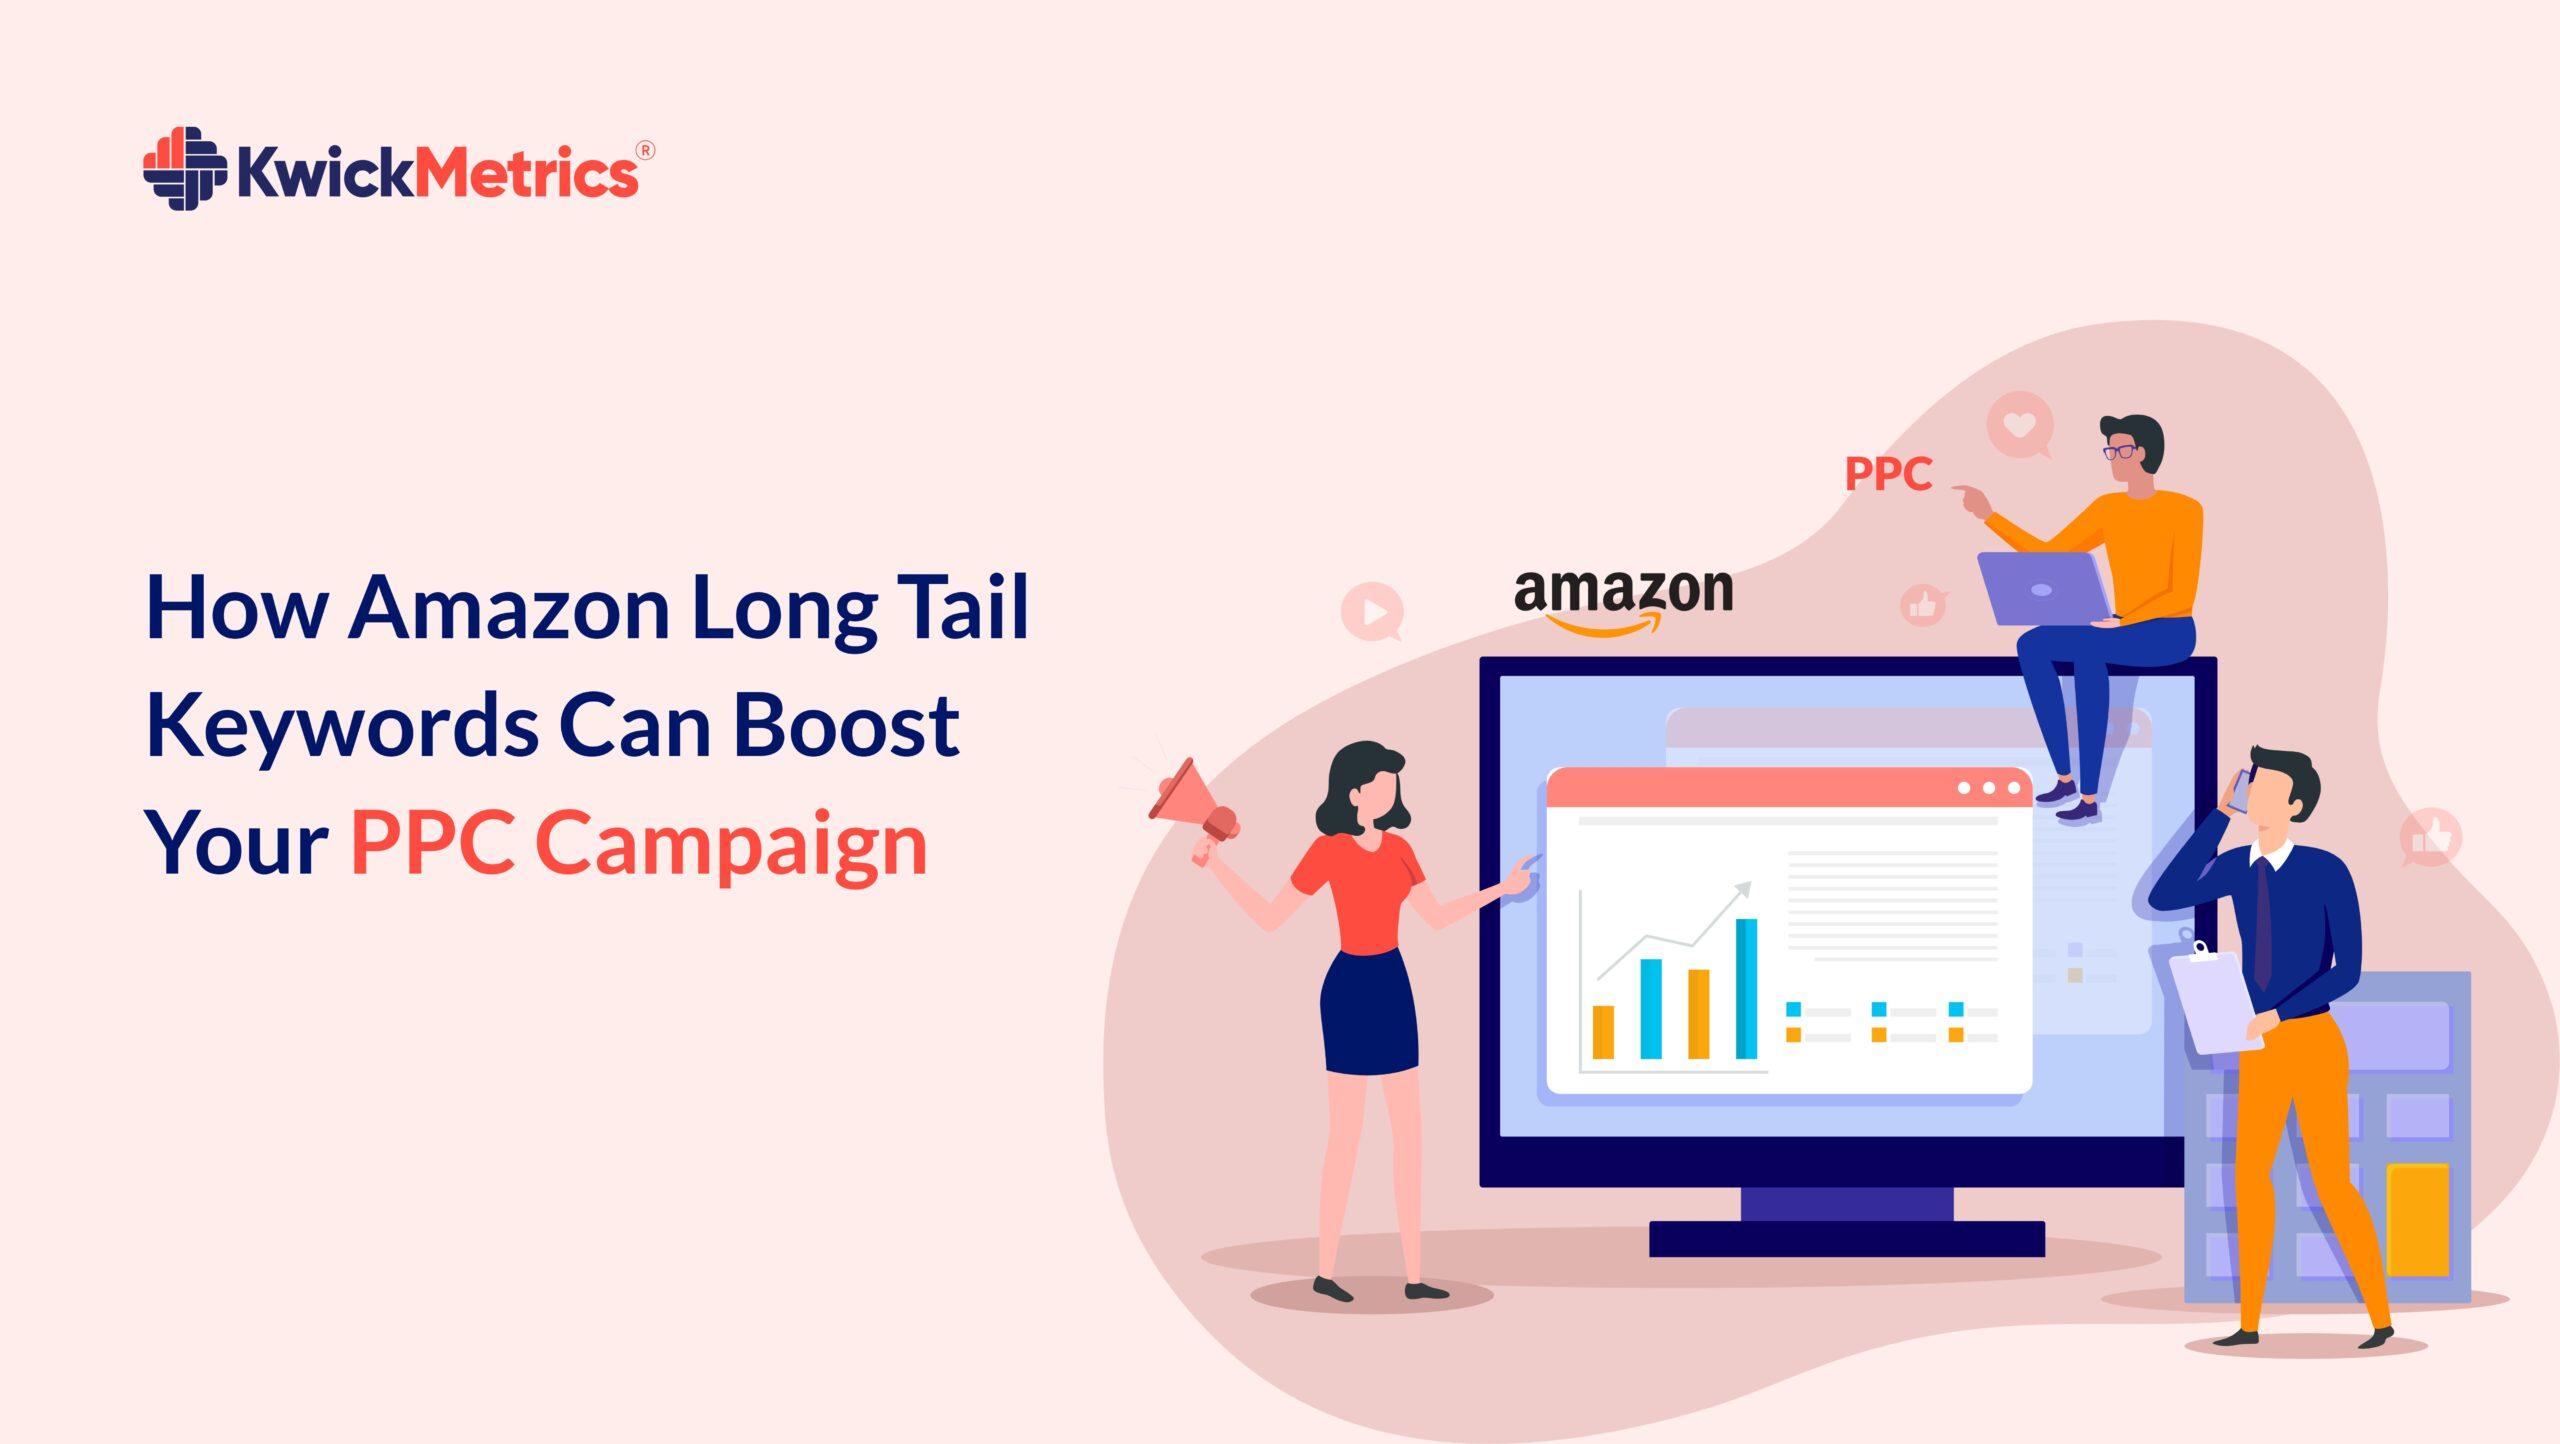 amazon-long-tail-keywords-can-boost-your-ppc-campaign